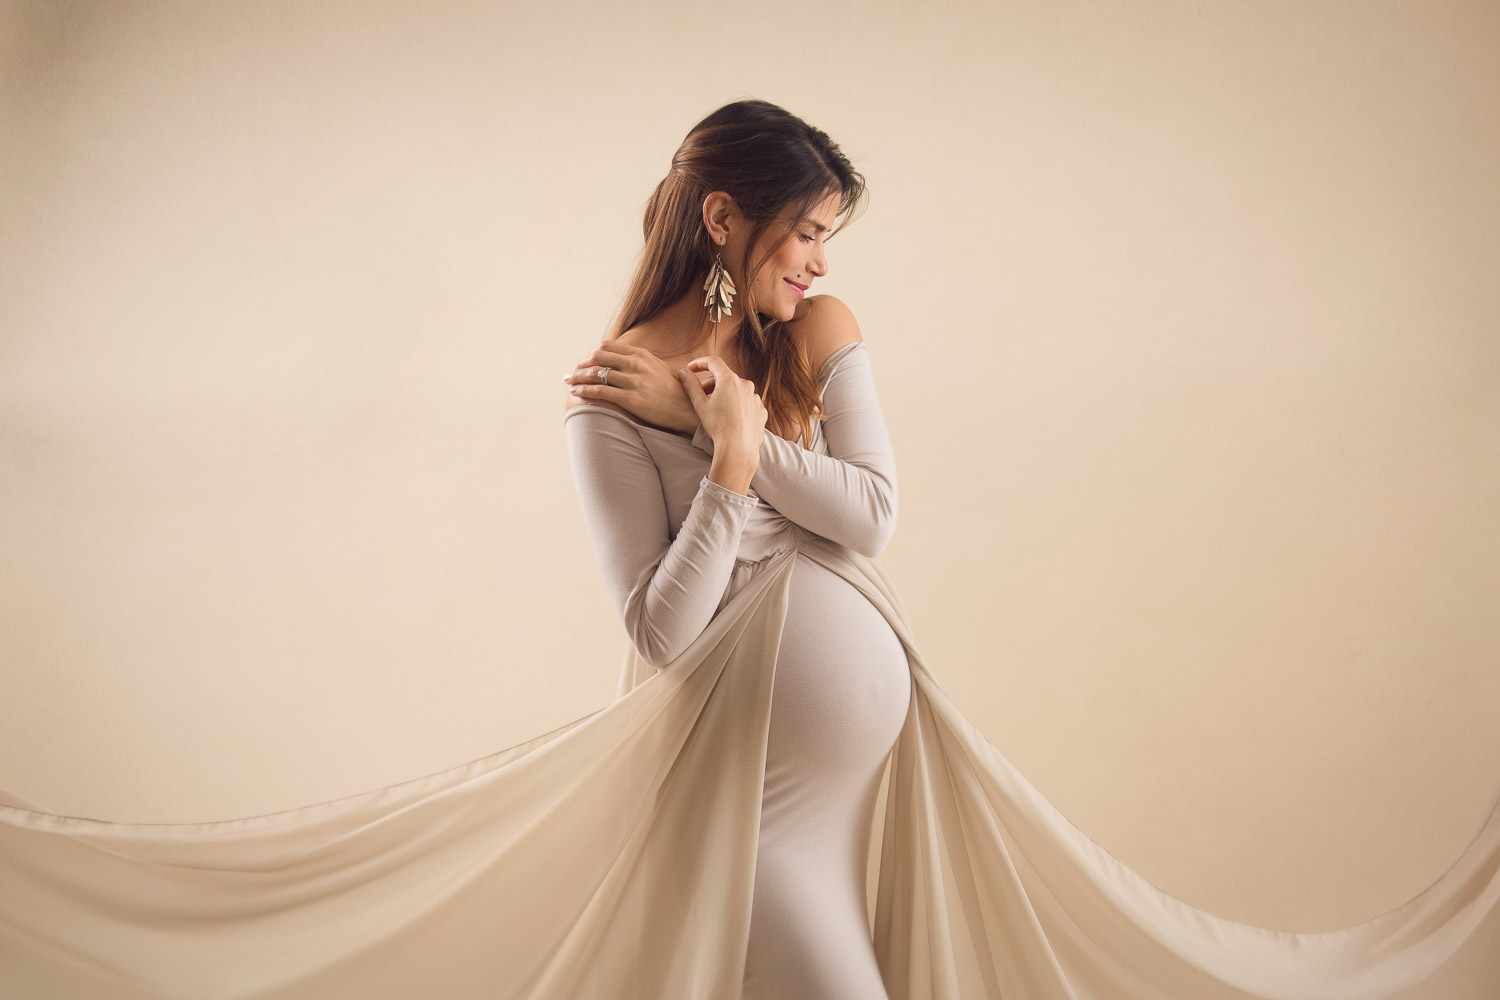 the best pose for maternity shoot with long with a long tail design, sexy yet elegant